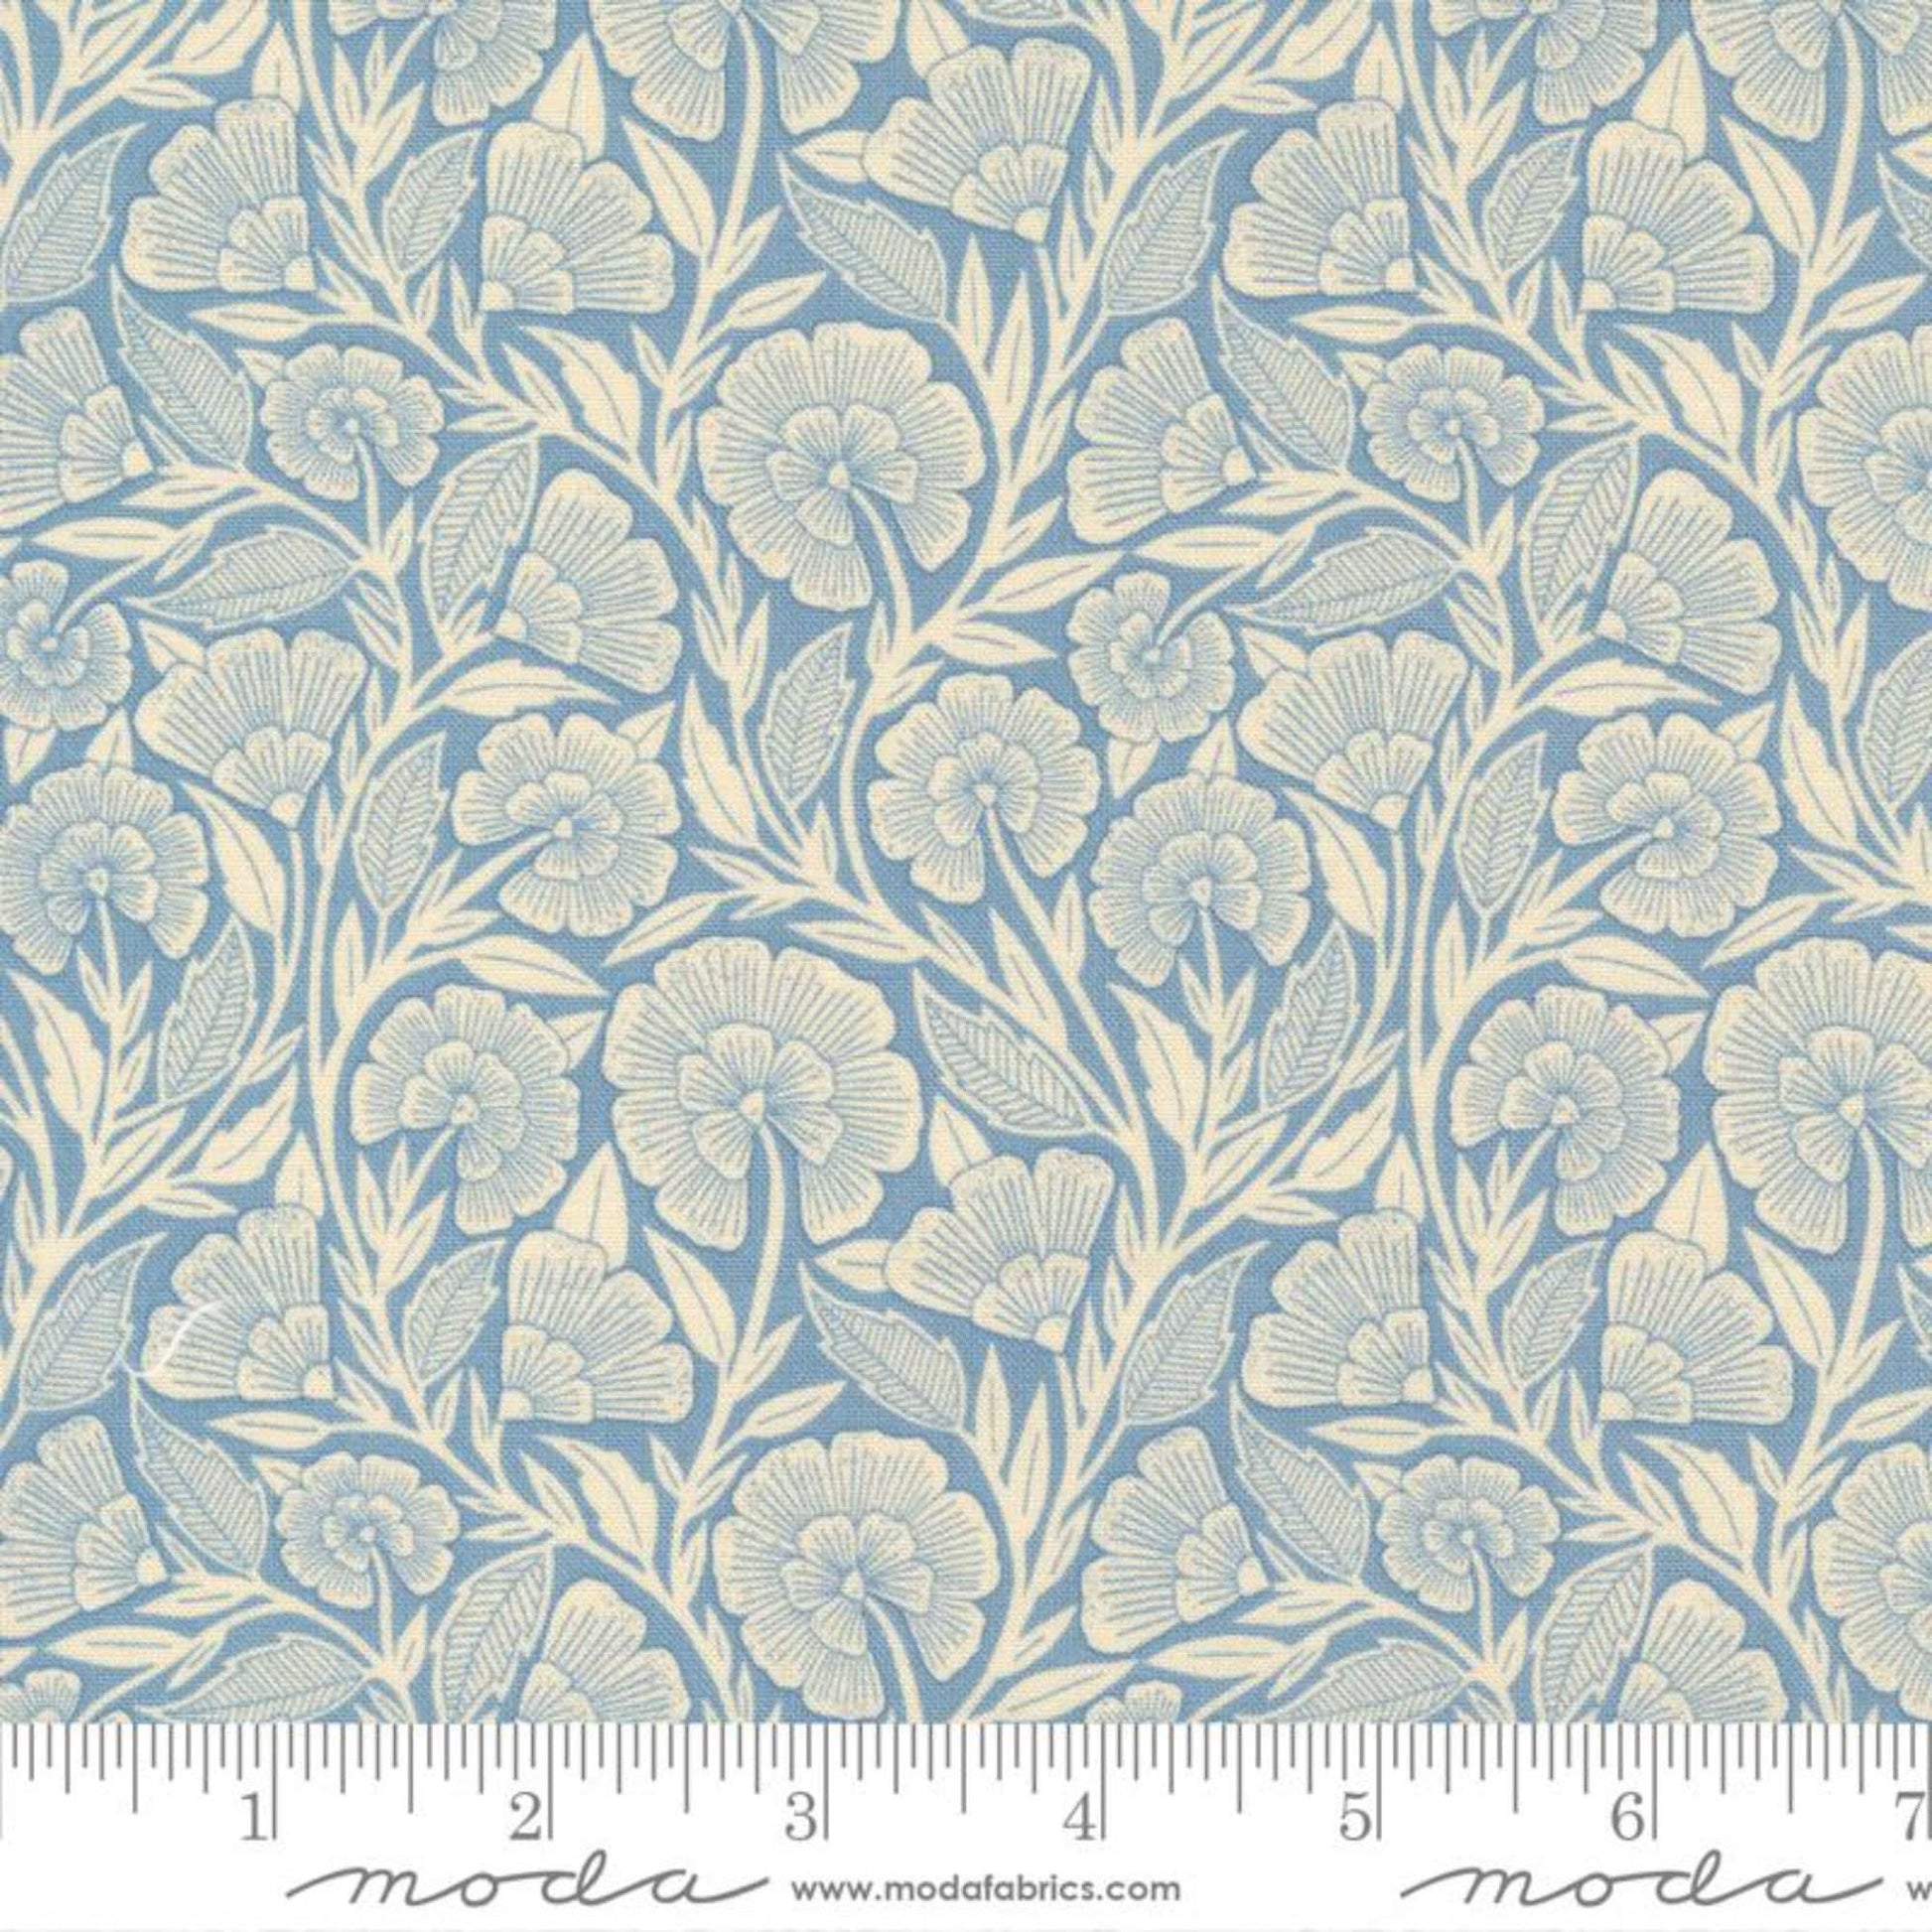 Curved Floral Sky Flower Press Katharine Watson Moda Quilters Cotton 3302 14 Fabric Fetish